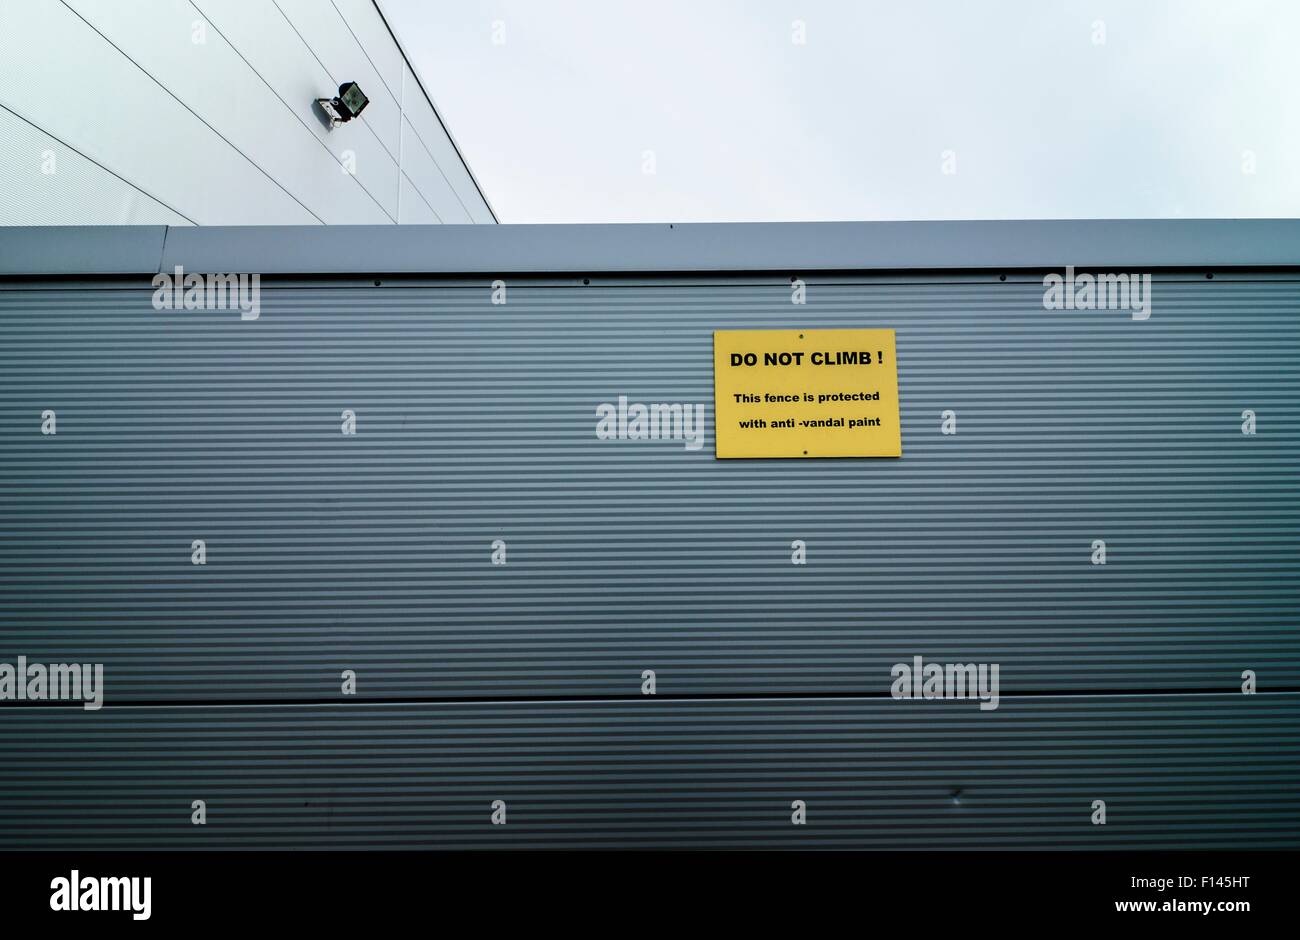 Metal clad industrial building with sign warning of anti-vandal paint. Anti-vandal paint uses a non-drying oil so that it remains permanently greasy and slippery, and leaves marks on intruders. Stock Photo